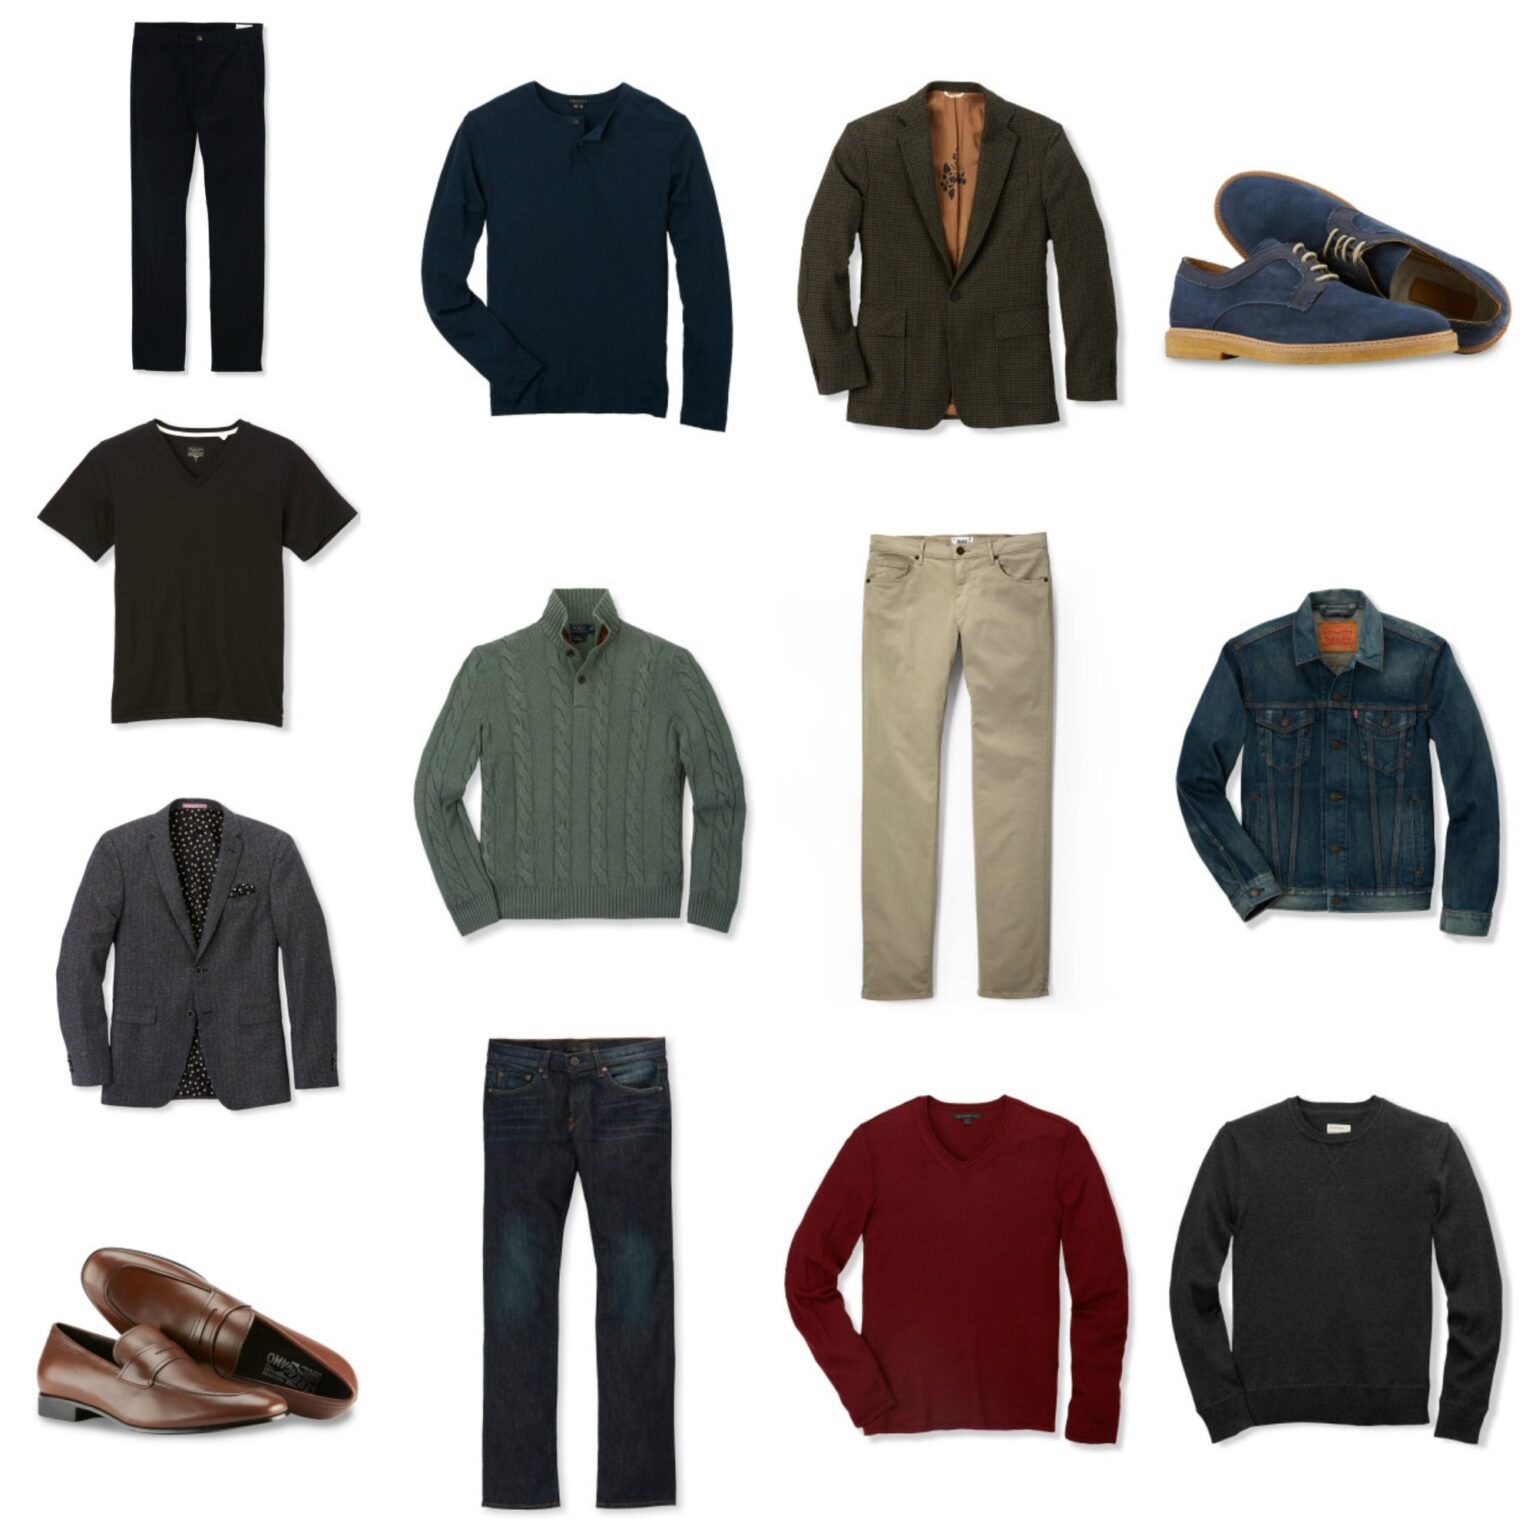 Nordstrom Trunk Club Clothing Subscription Box Review: High-Quality Men ...